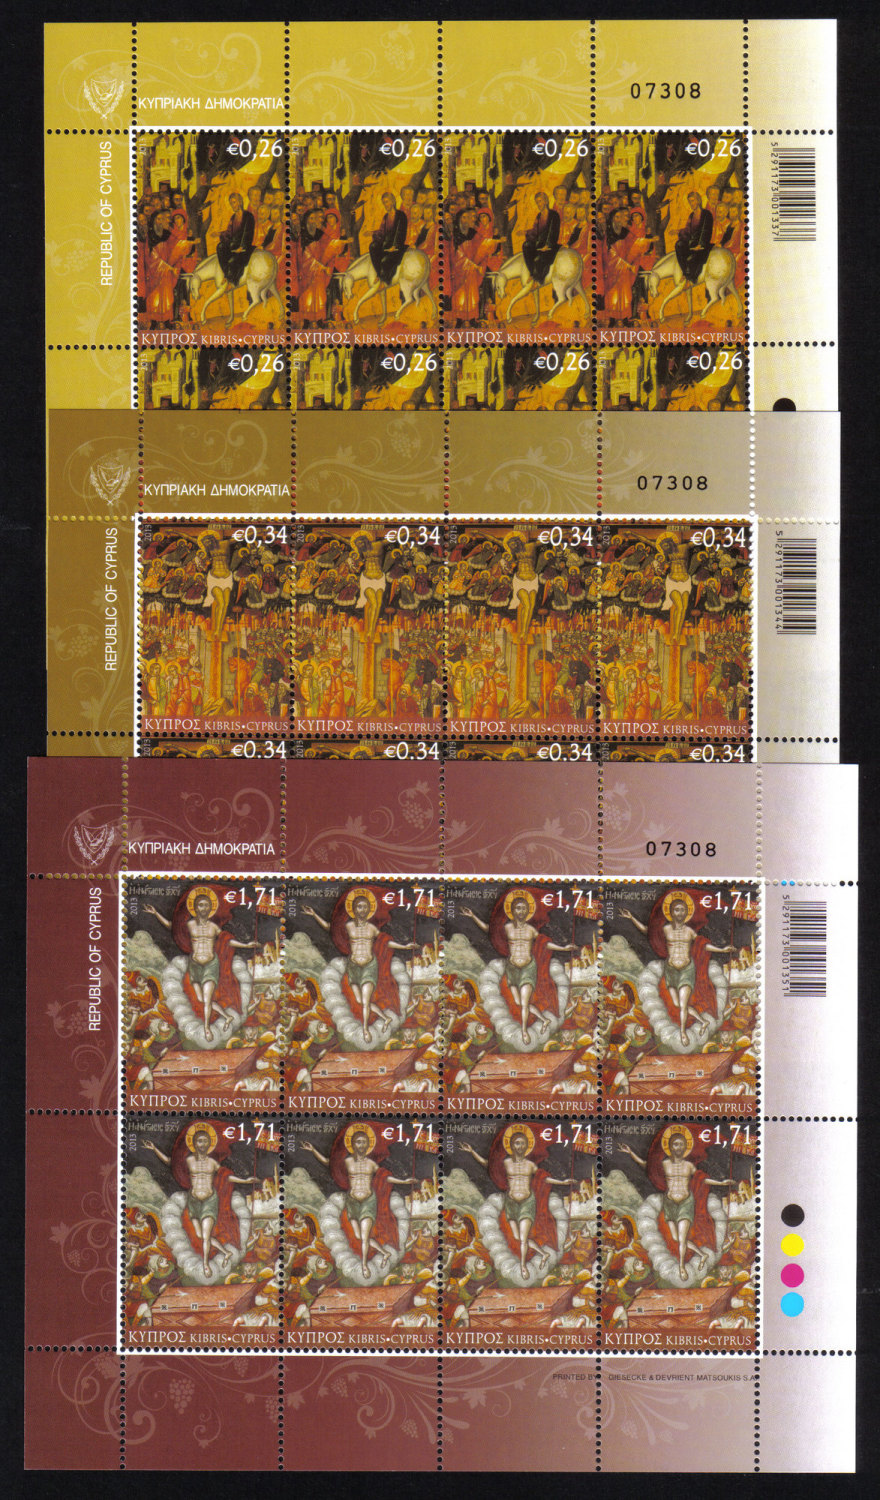 Cyprus Stamps SG 2013 (d) Easter Full sheets - MINT